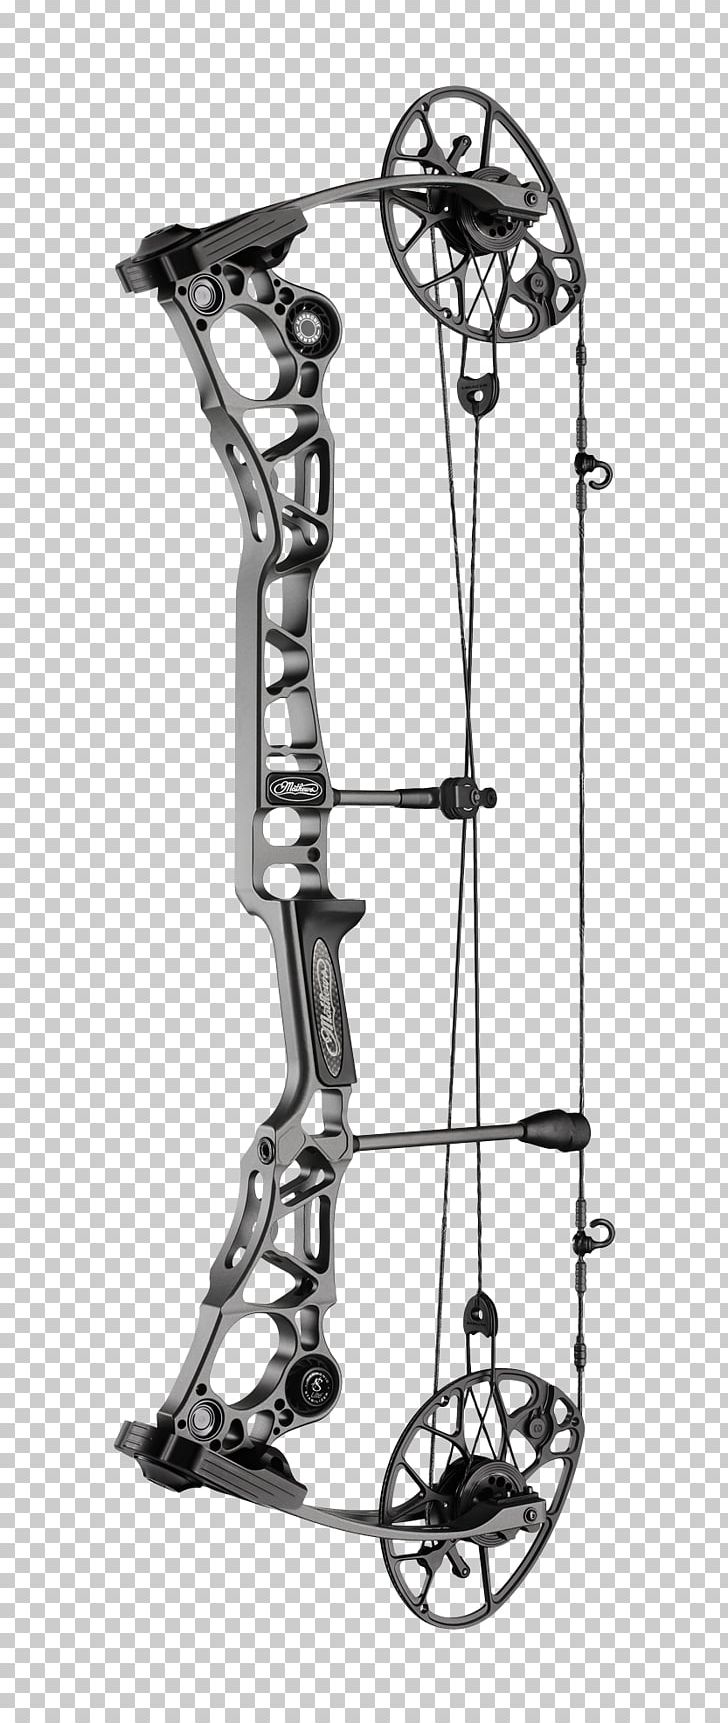 Compound Bows Bow And Arrow Archery Bowhunting PNG, Clipart, Angle, Archery, Auto Part, Black And White, Bow Free PNG Download